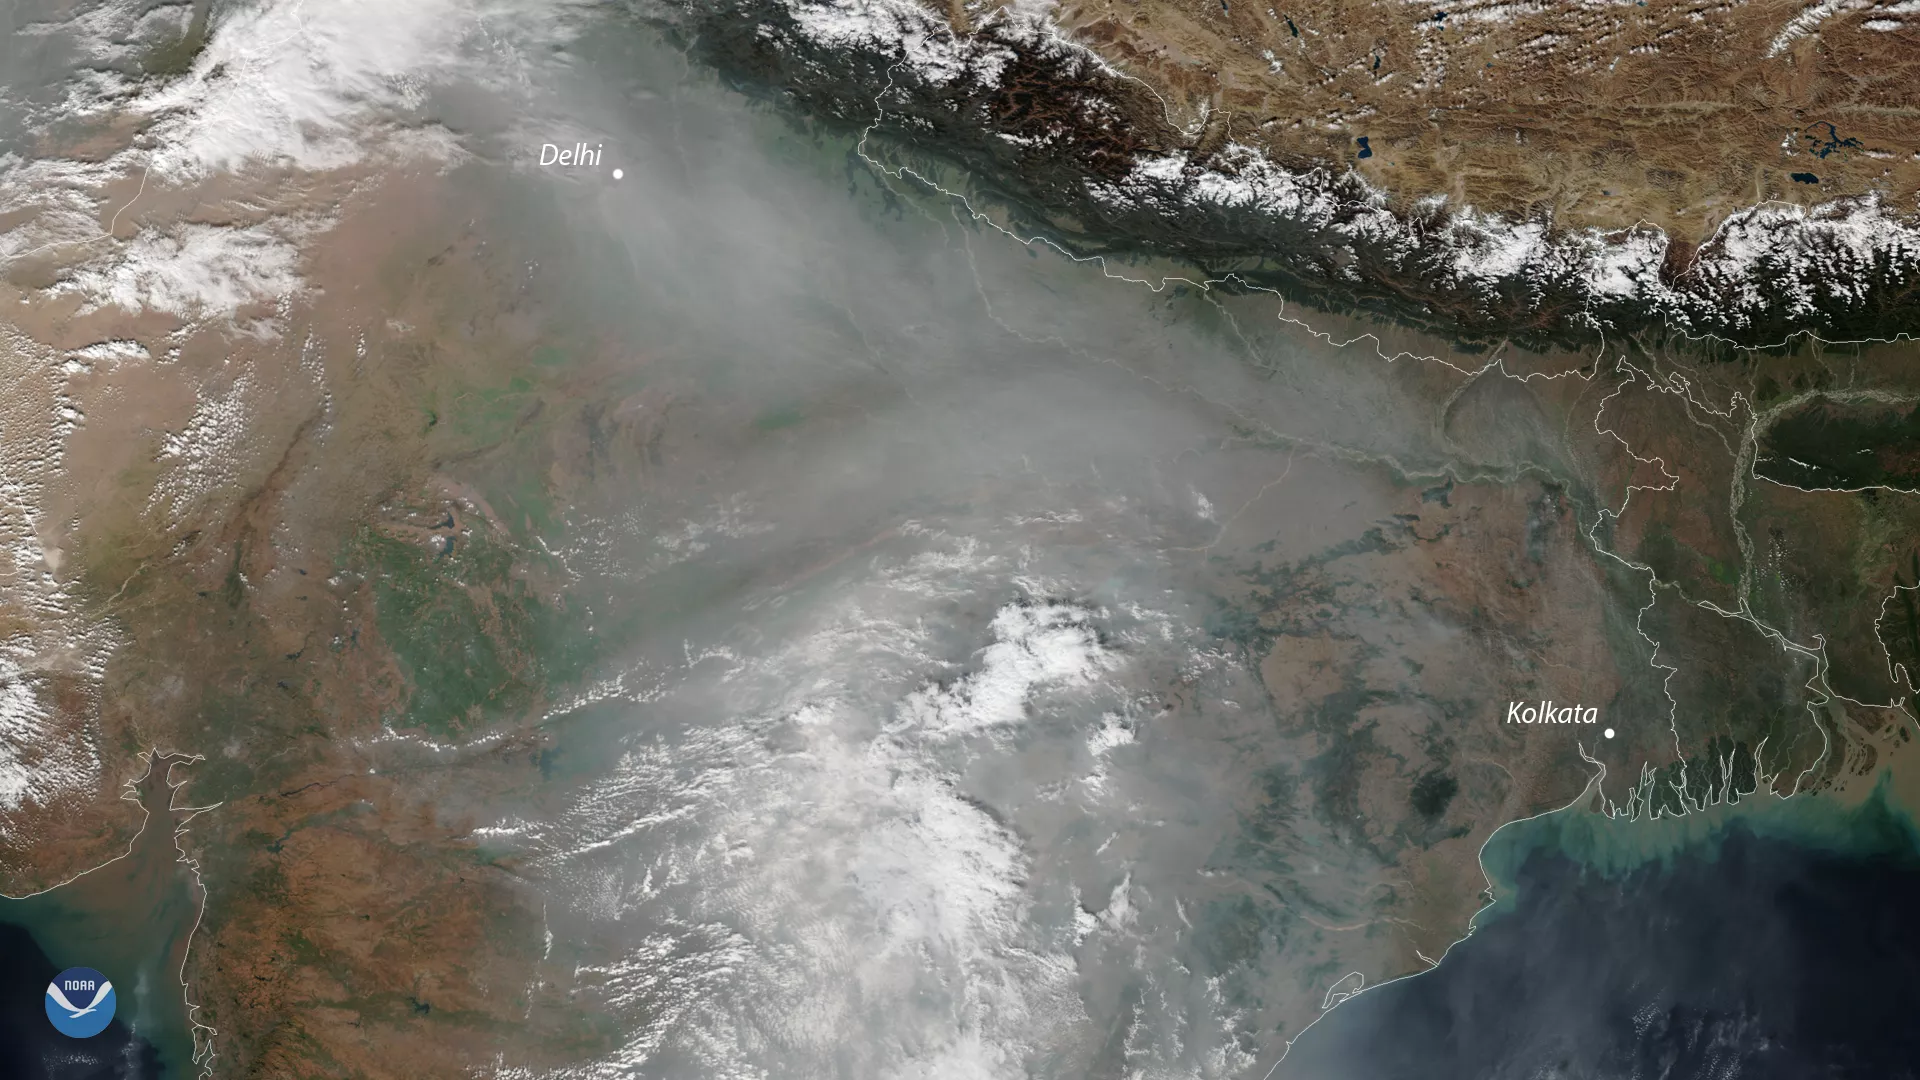 NOAA-20 TrueColor imagery of smog over the Indian subcontinent, taken in Dec. 2018.